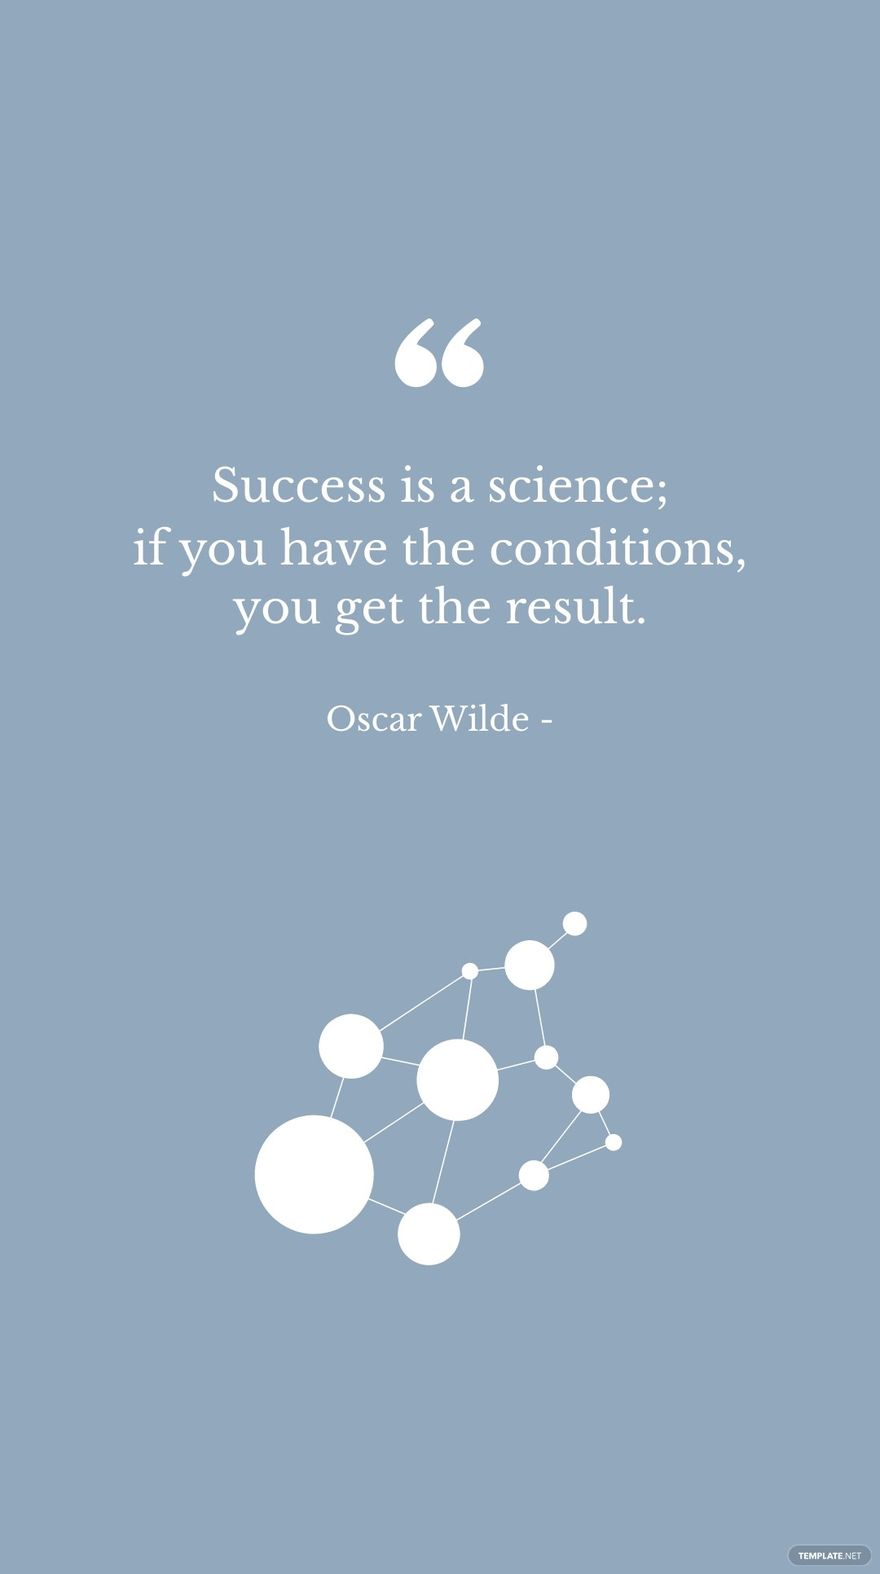 Oscar Wilde - Success is a science; if you have the conditions, you get the result.